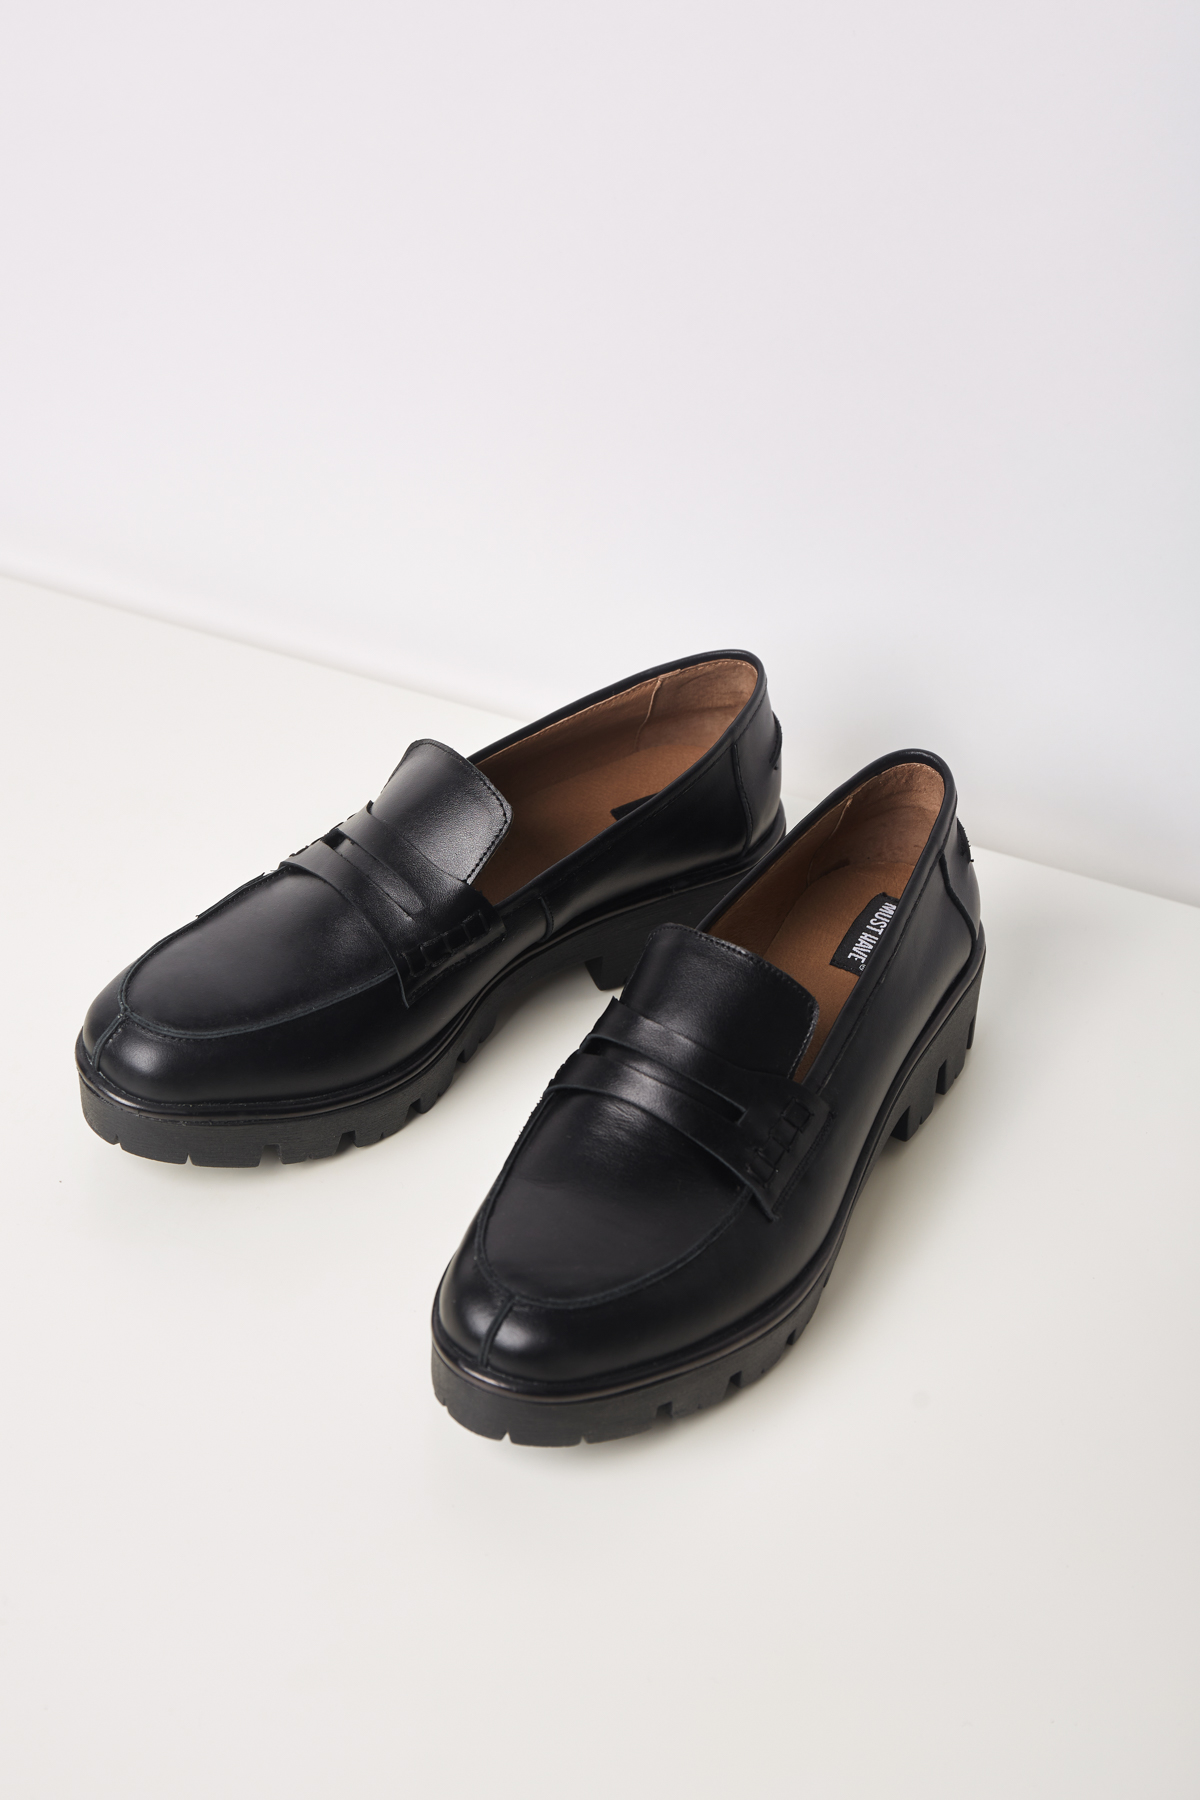 Black genuine leather loafers, photo 3